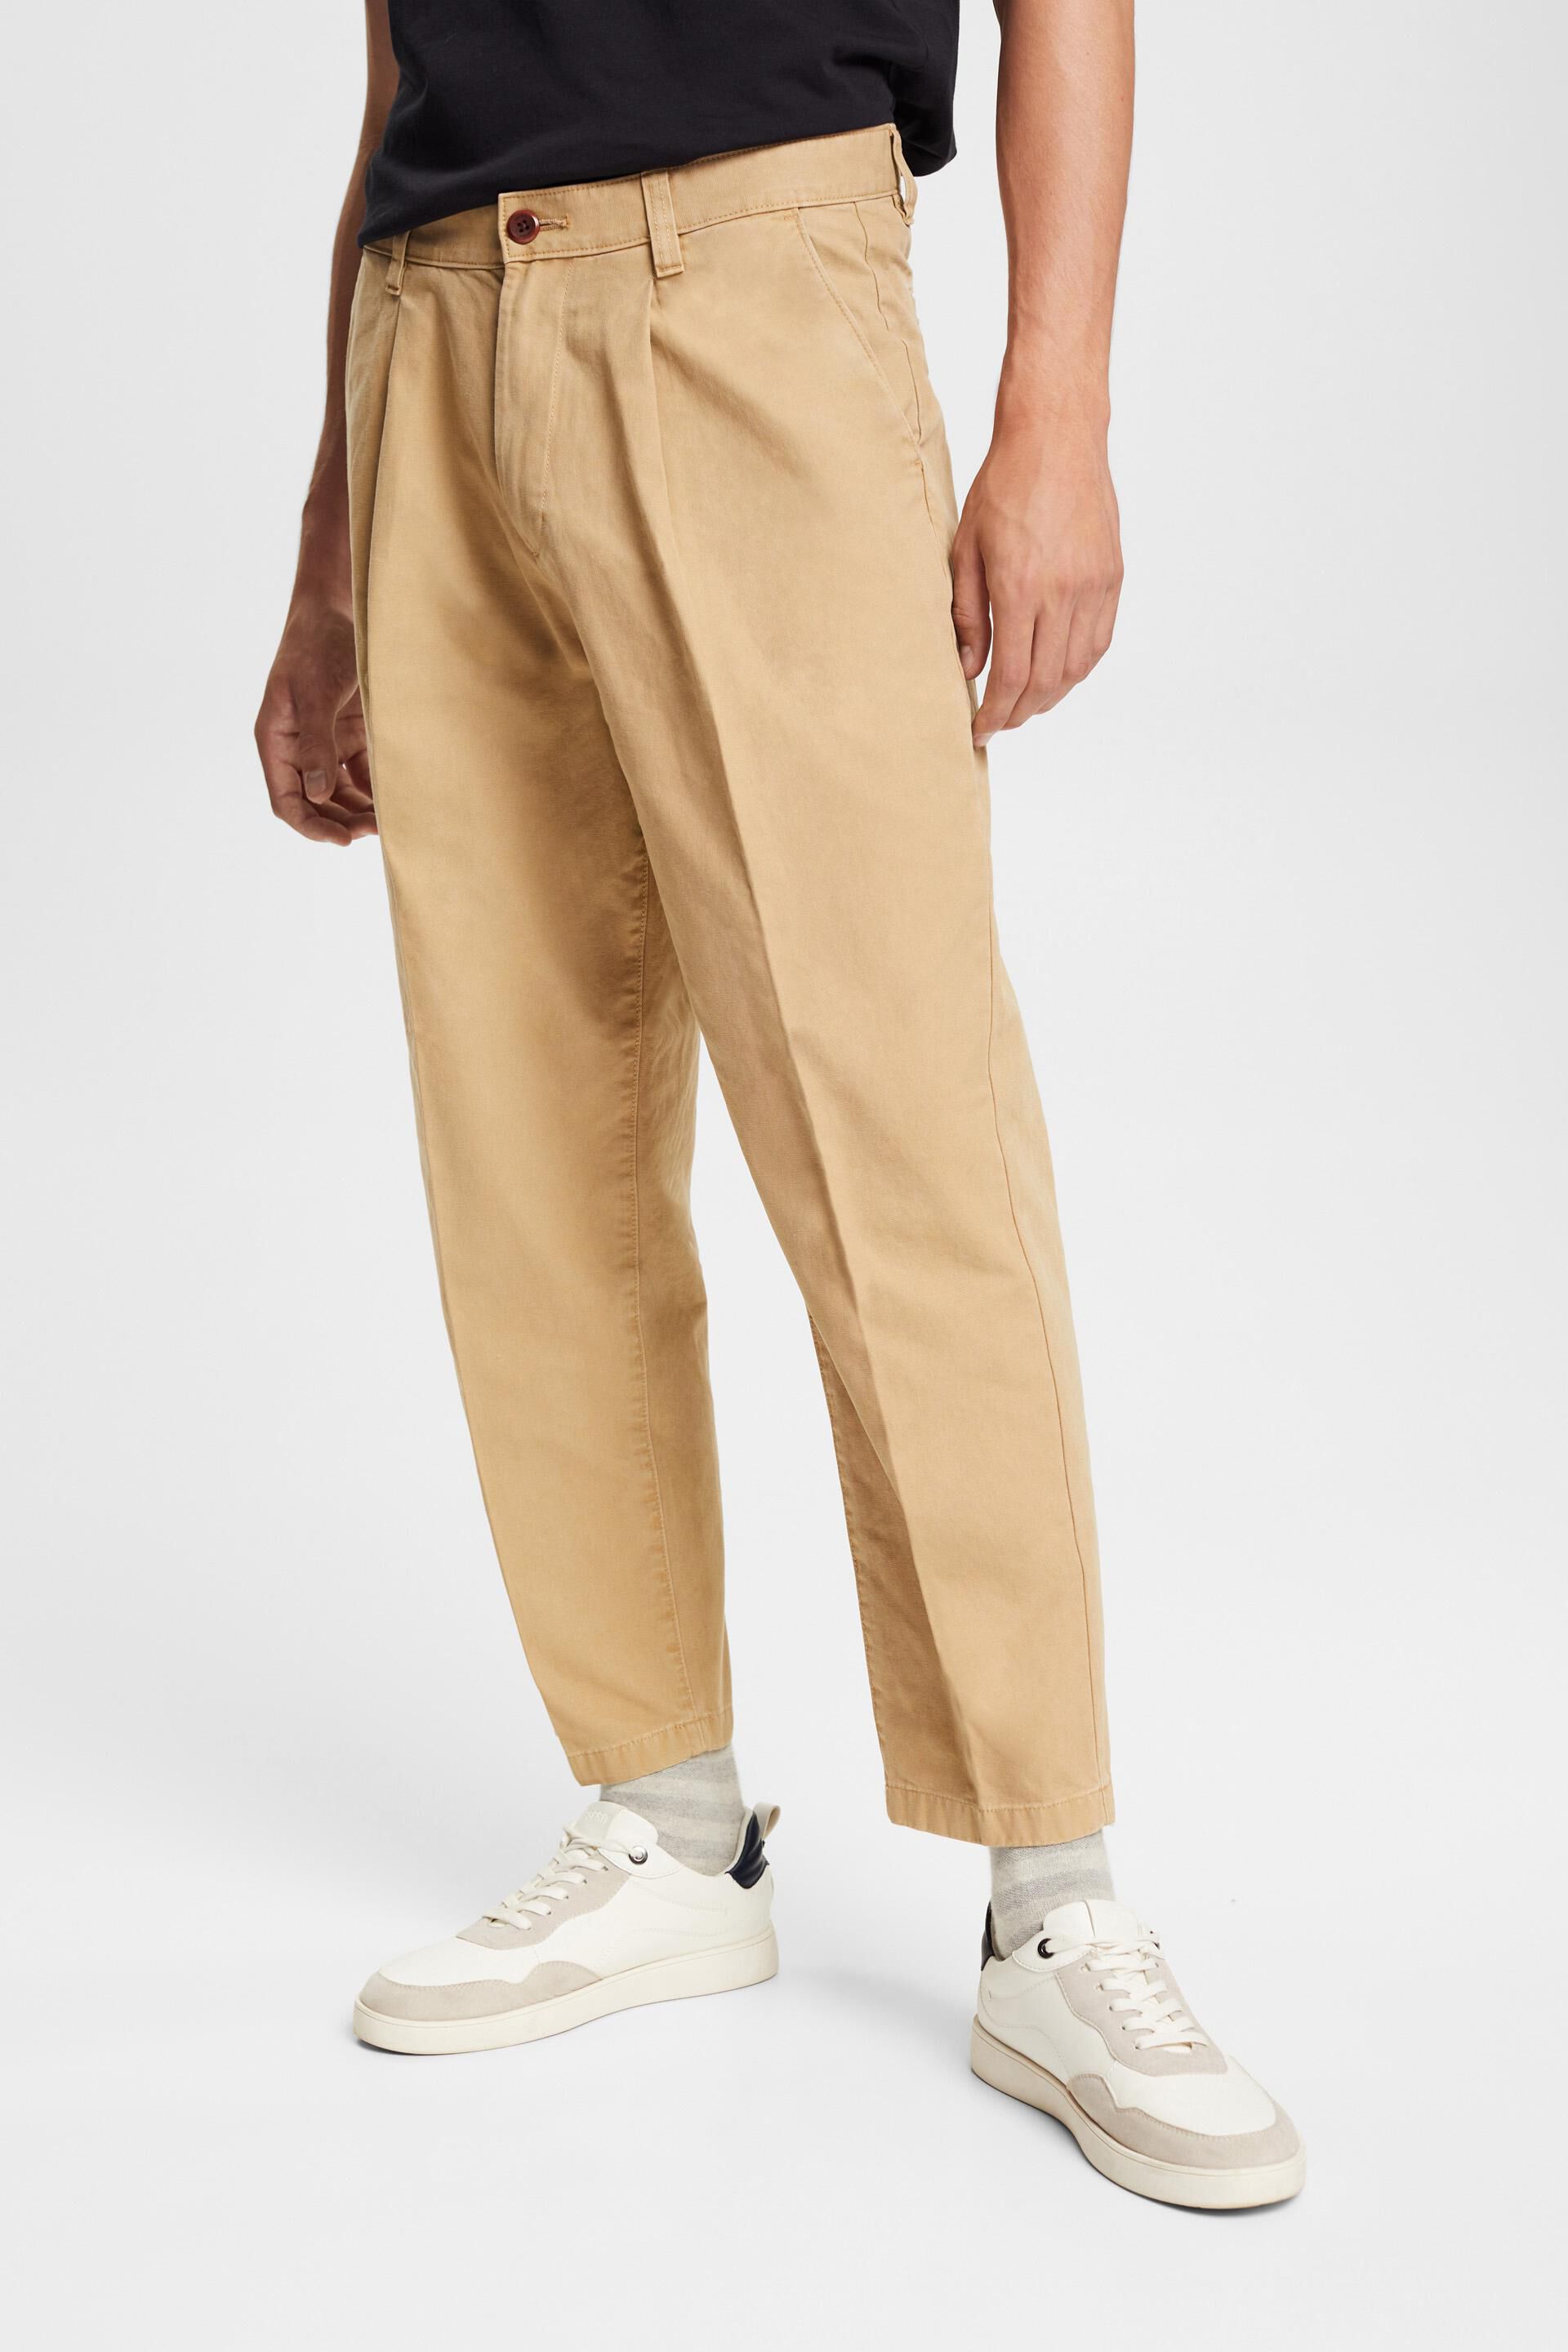 Shop the Latest in Men's Fashion Loose fit chinos | ESPRIT Taiwan 